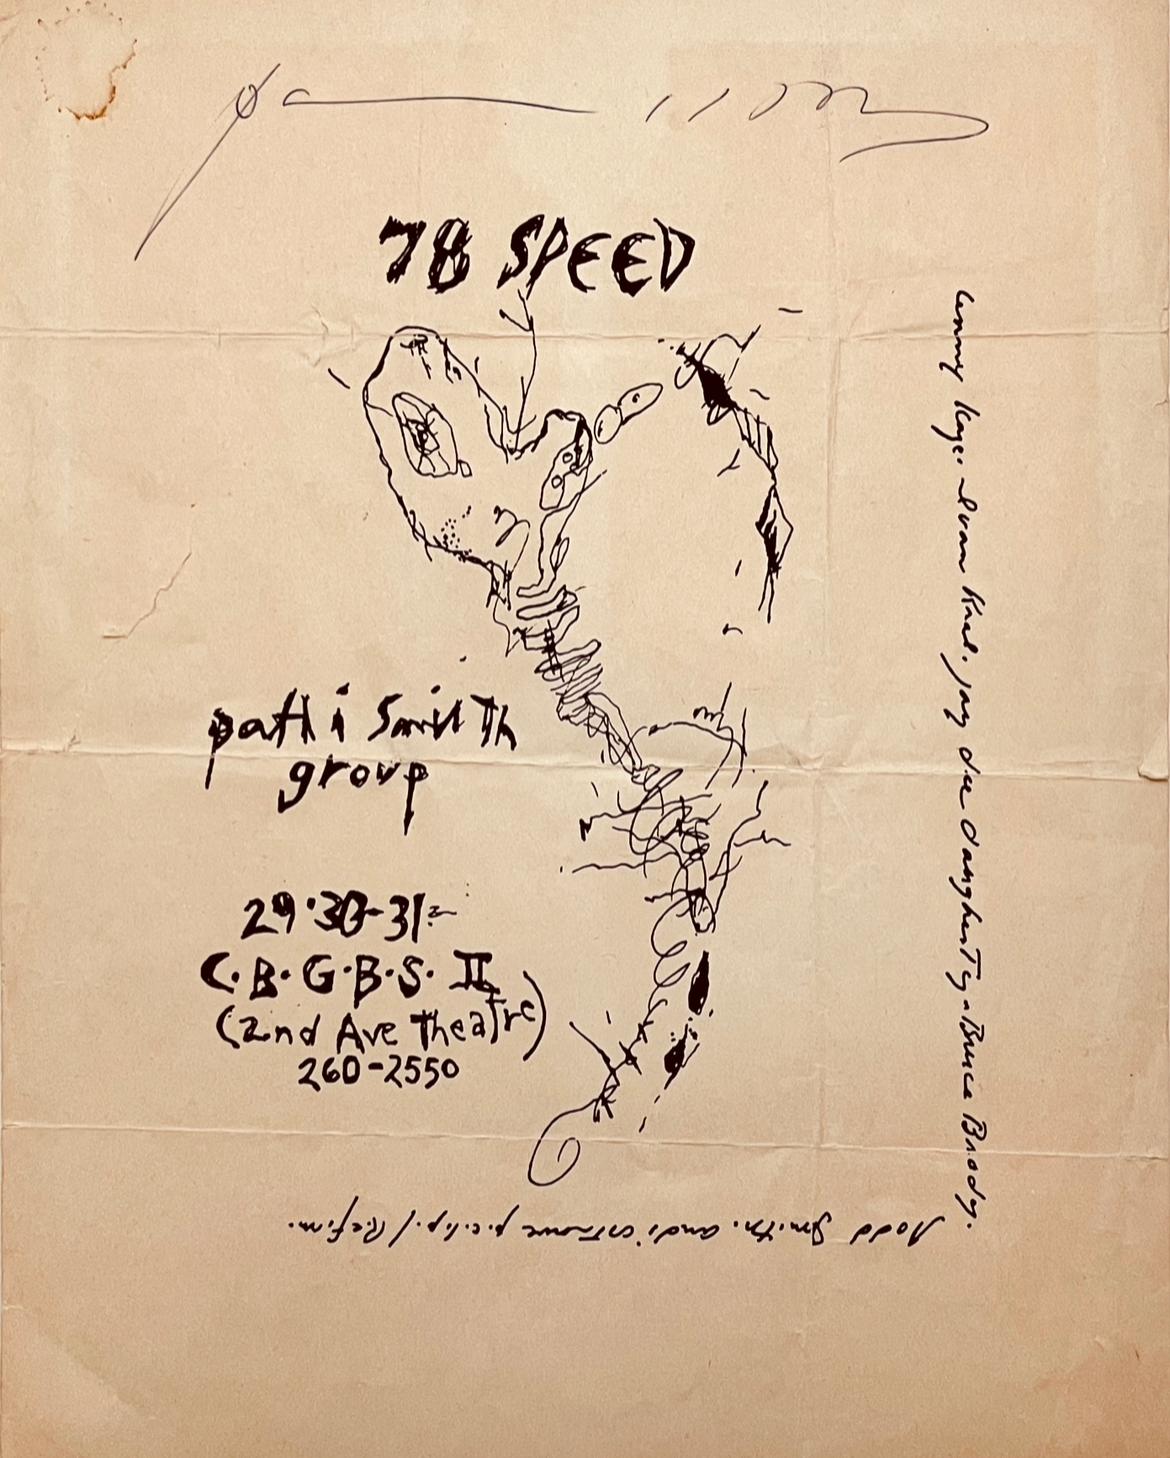 Patti Smith 78 Speed 1977:
Rare original hand-signed flyer for Patti Smith Group shows at CBGB 1977. The flyer was designed by Patti Smith using one of her drawings at the time; with the historic show entitled “78 Speed” taking place December 29, 30